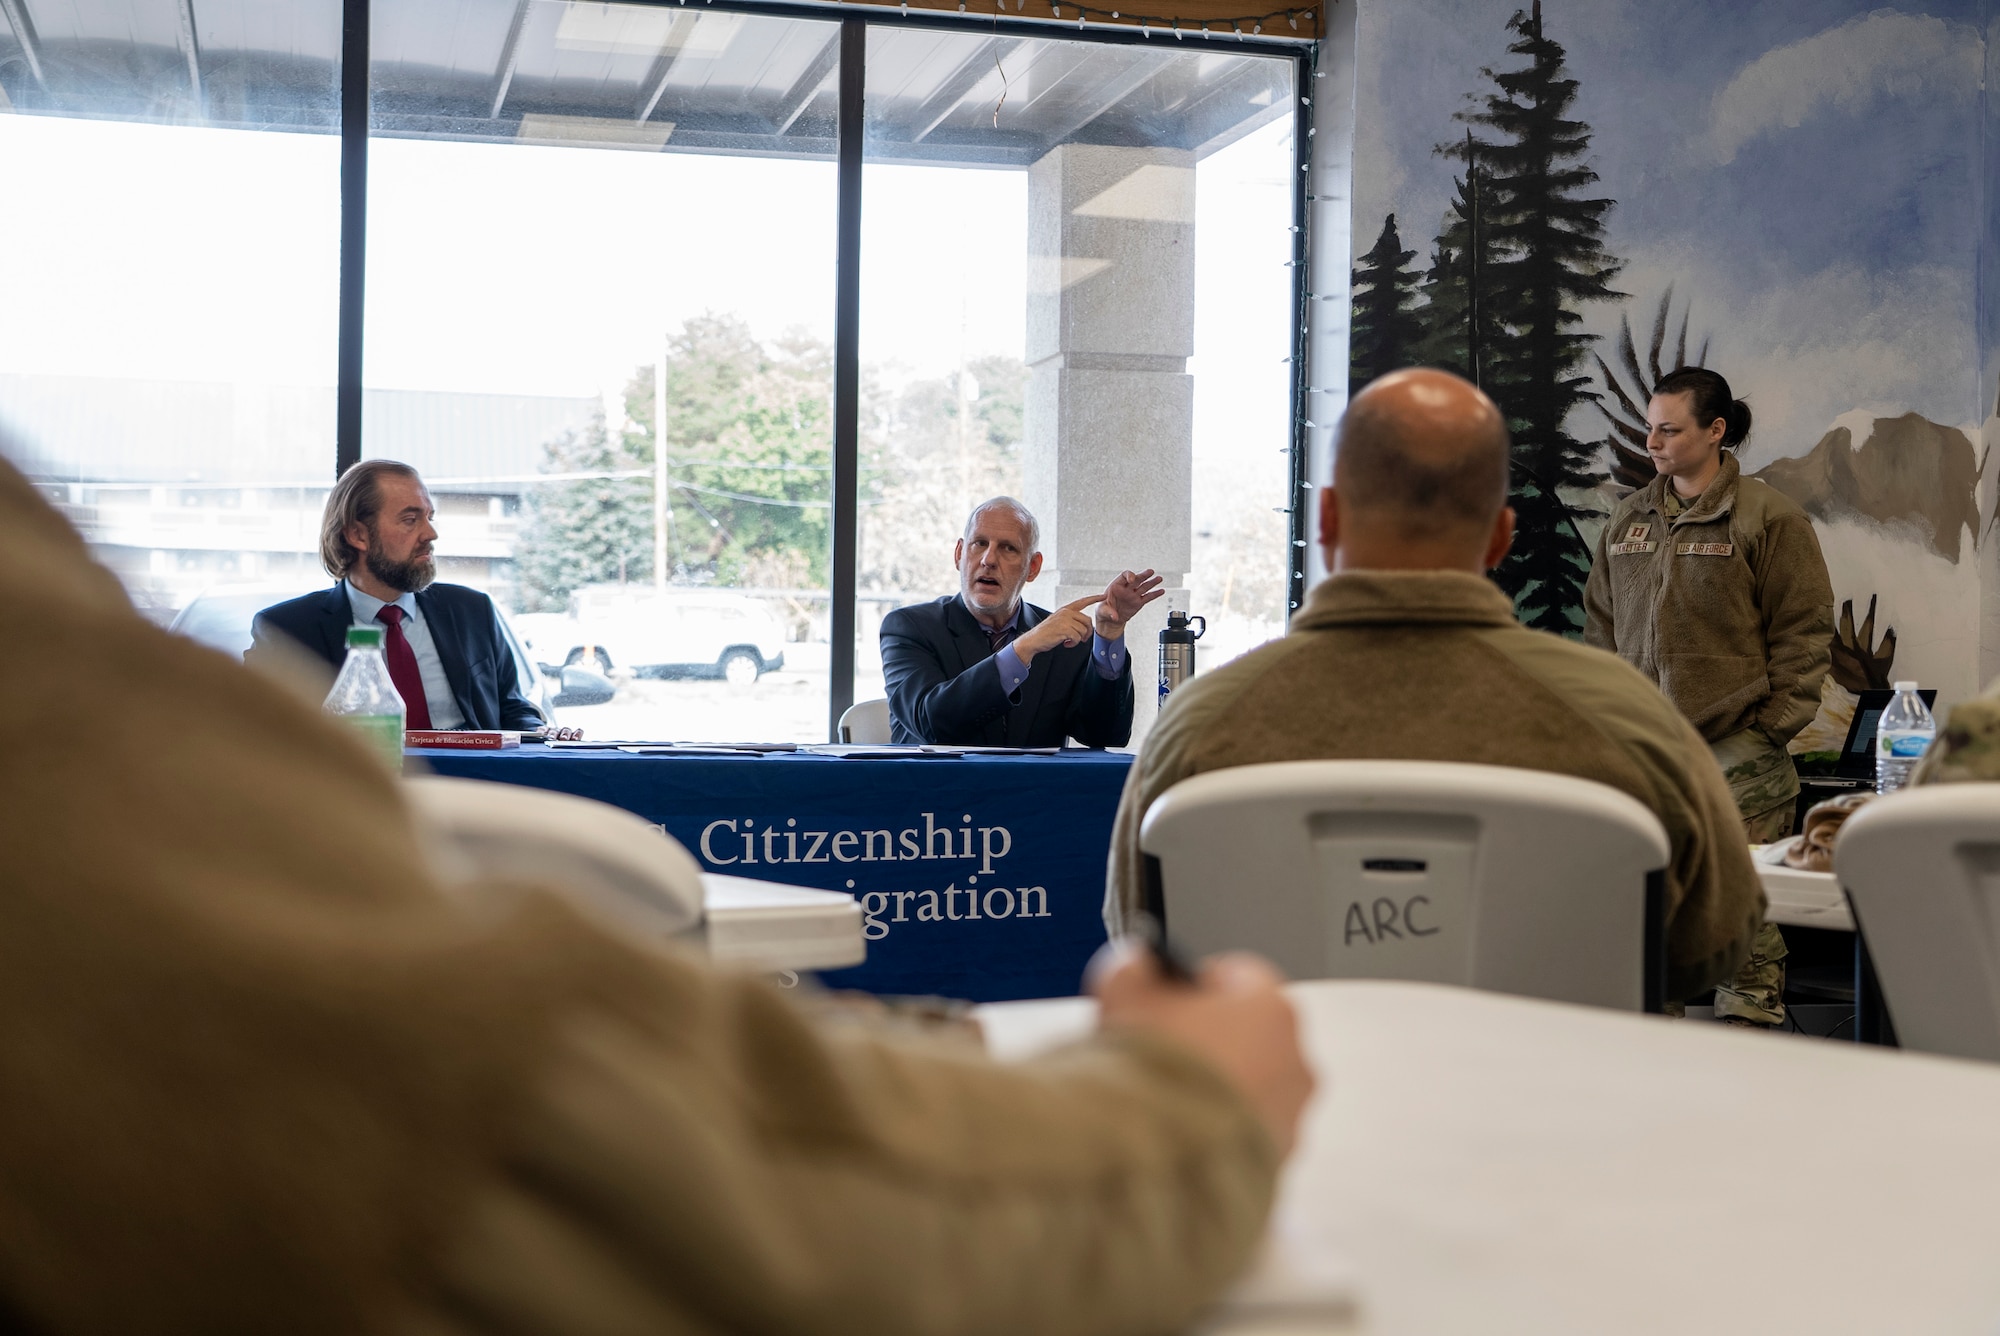 Representatives from the United States Citizenship and Immigration Services sit at a table briefing service members and families.